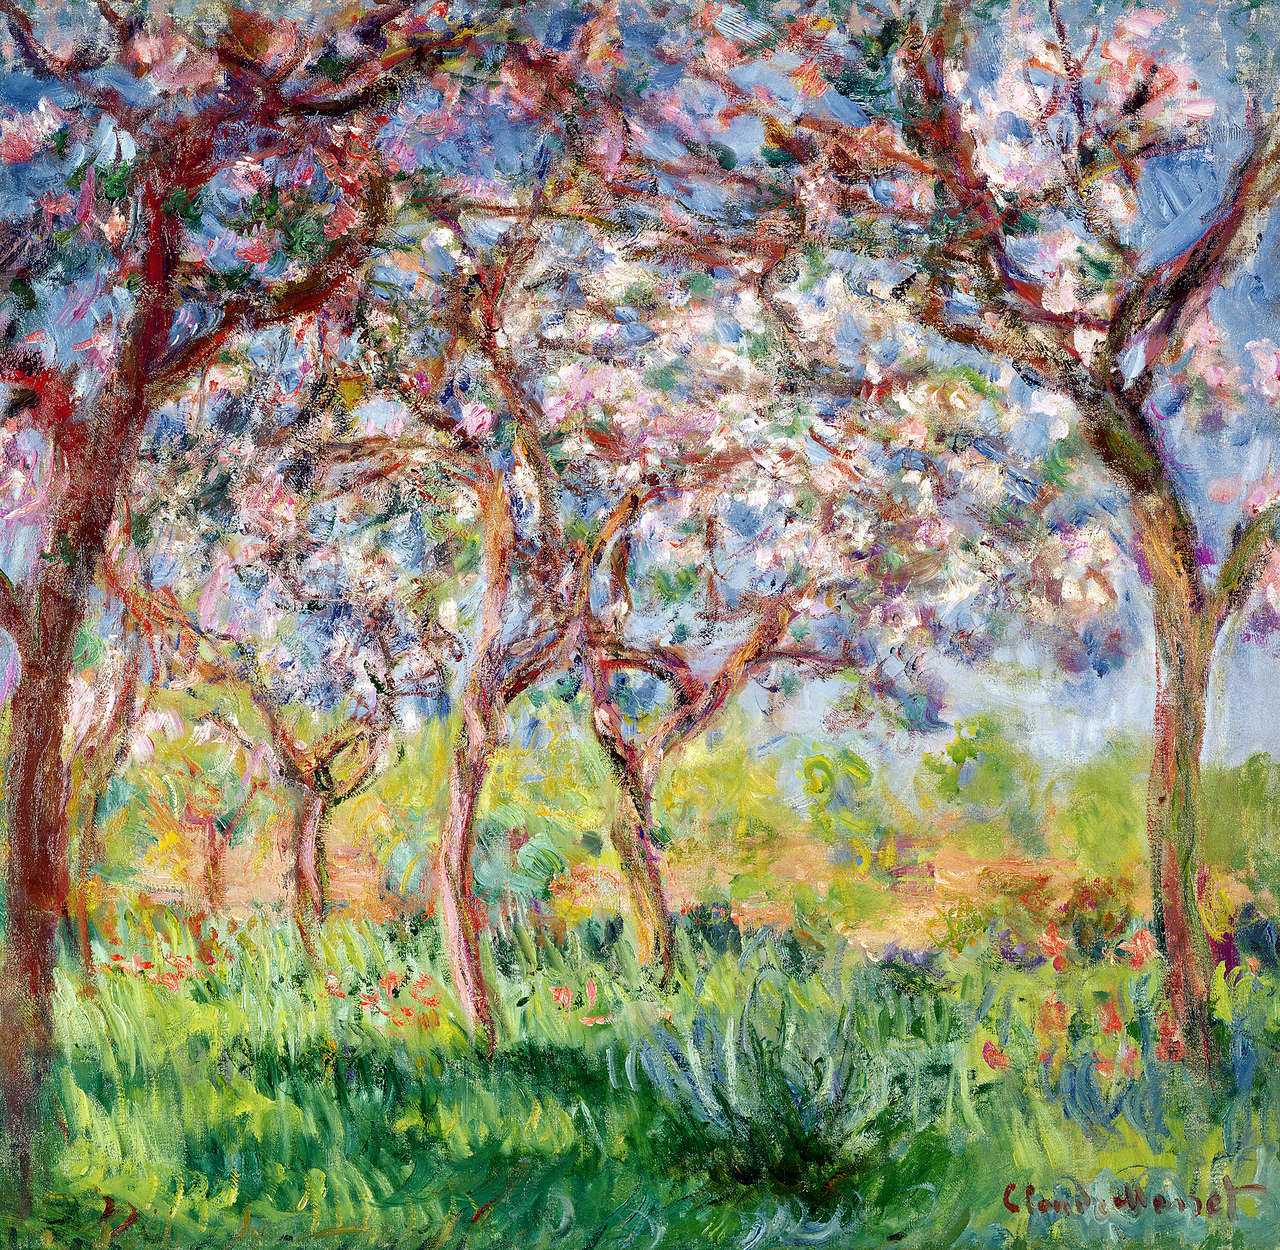             Photo wallpaper "Spring in Giverny" by Claude Monet
        